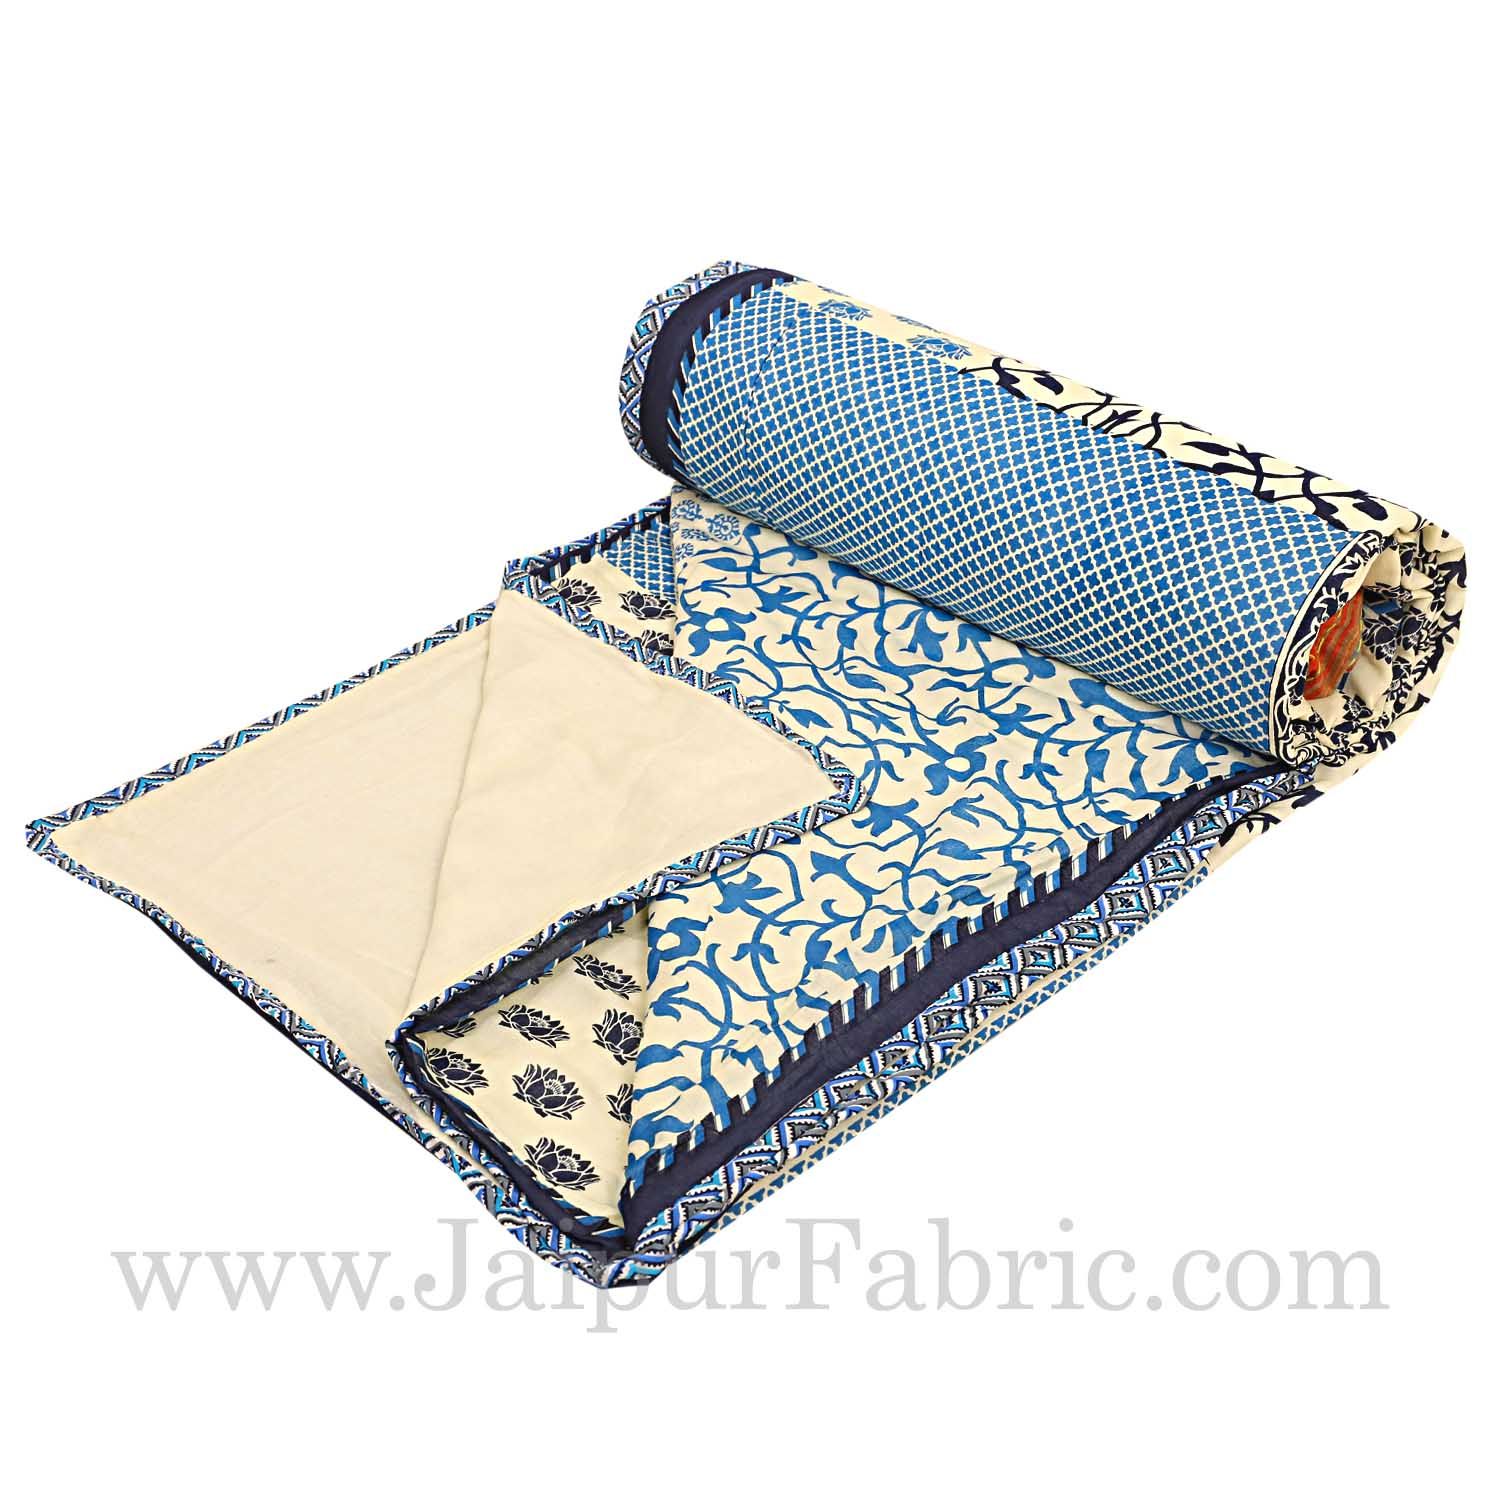 Double Bed Dohar Smooth Cotton Cover Small Boota Print Use As ( Blanket, Chaddar,Ac Quilt)